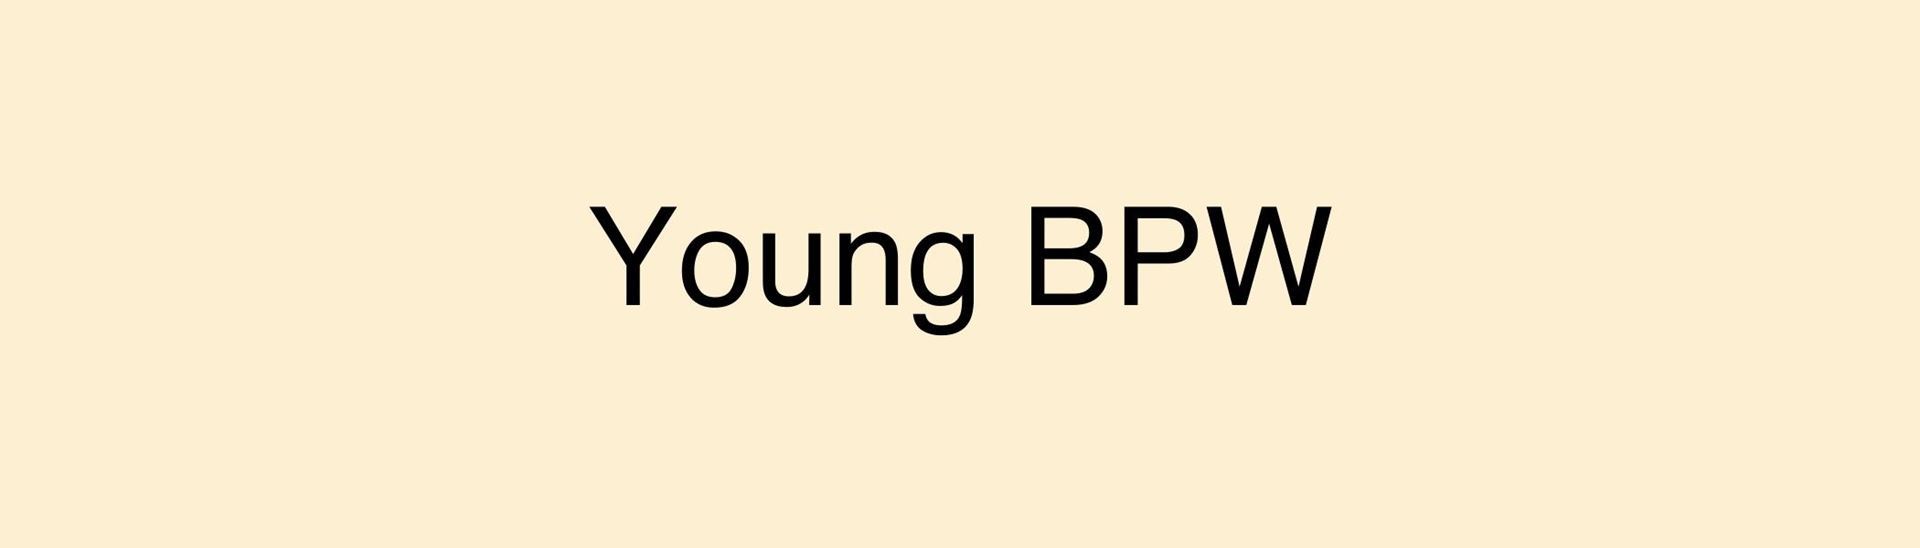 Young BPW